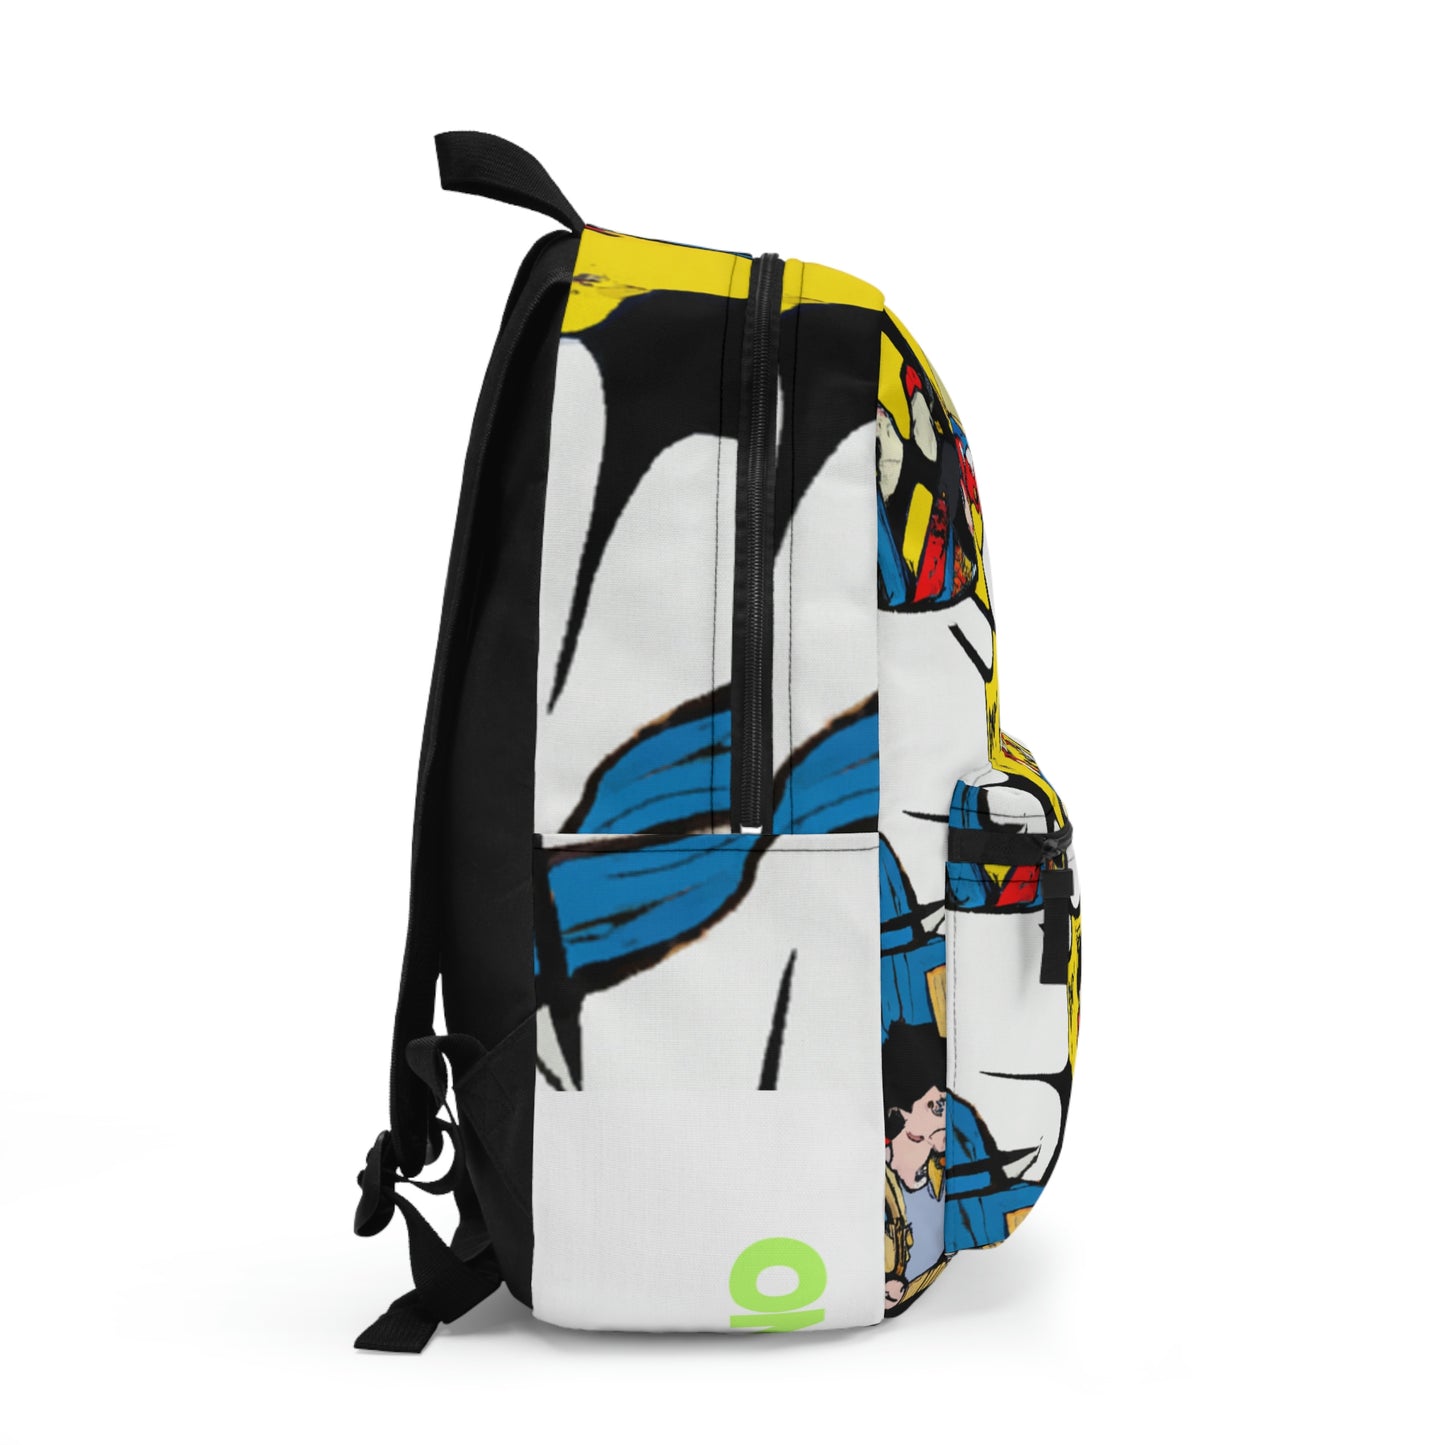 Quinzel Sparks - Comic Book Backpack 1 of 1 Collectible